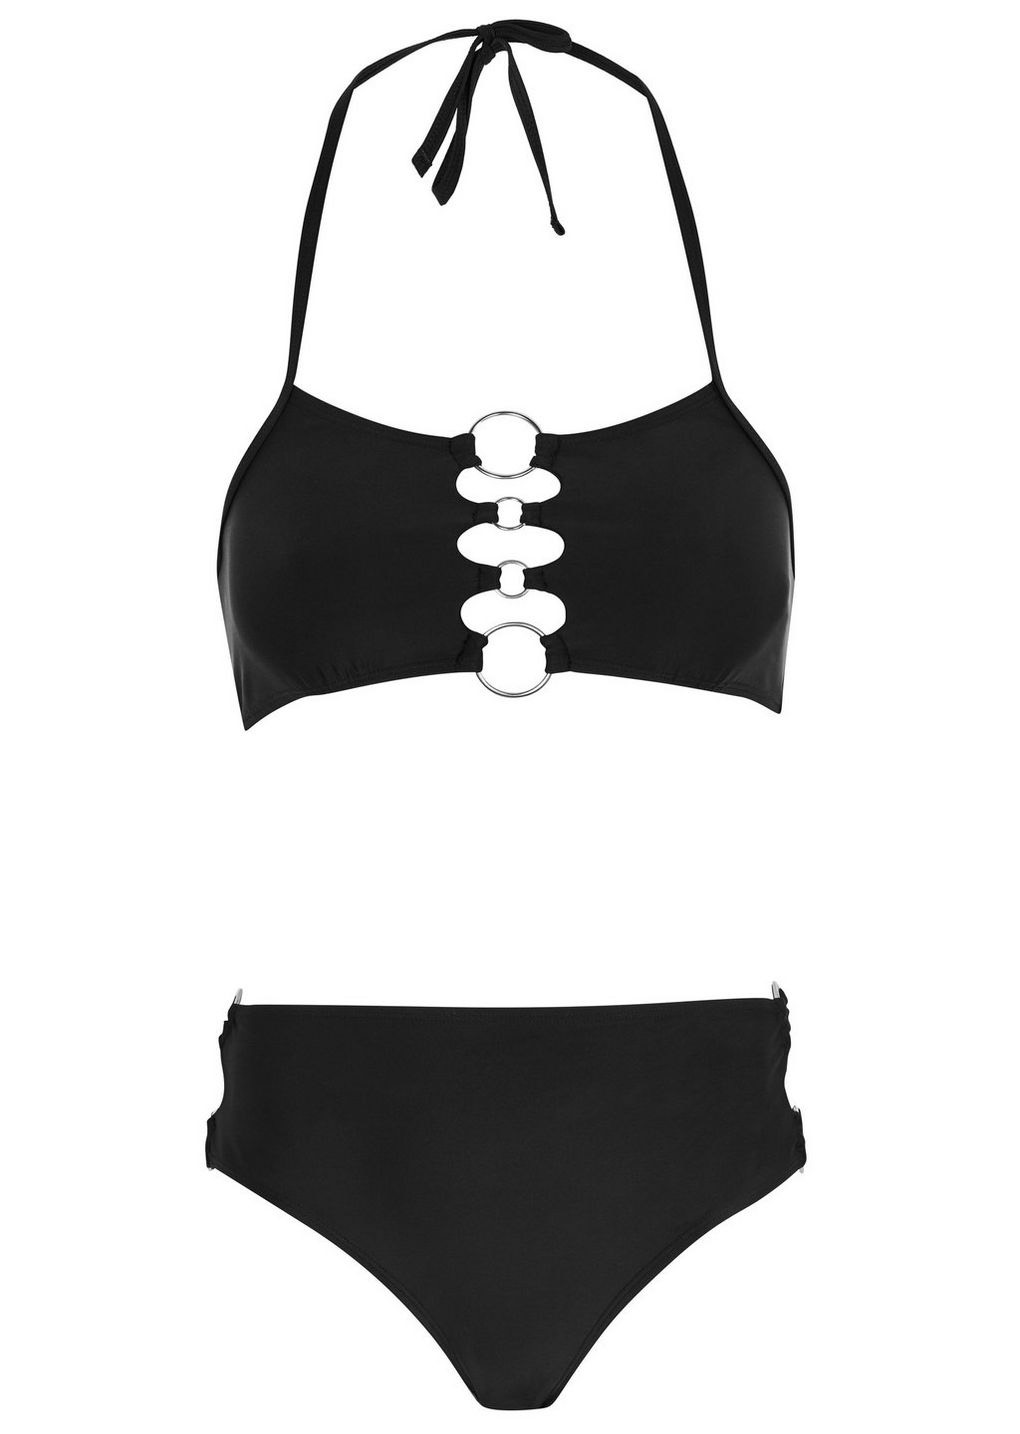 Goths in Hot Weather | 15 Must Have Swimsuits that will Rock this Summer | Gothic Swimwear |Black | High Ring Bikini | O Rings | Topshop | Rocker Chic | www.MeandAnnabelLee.com